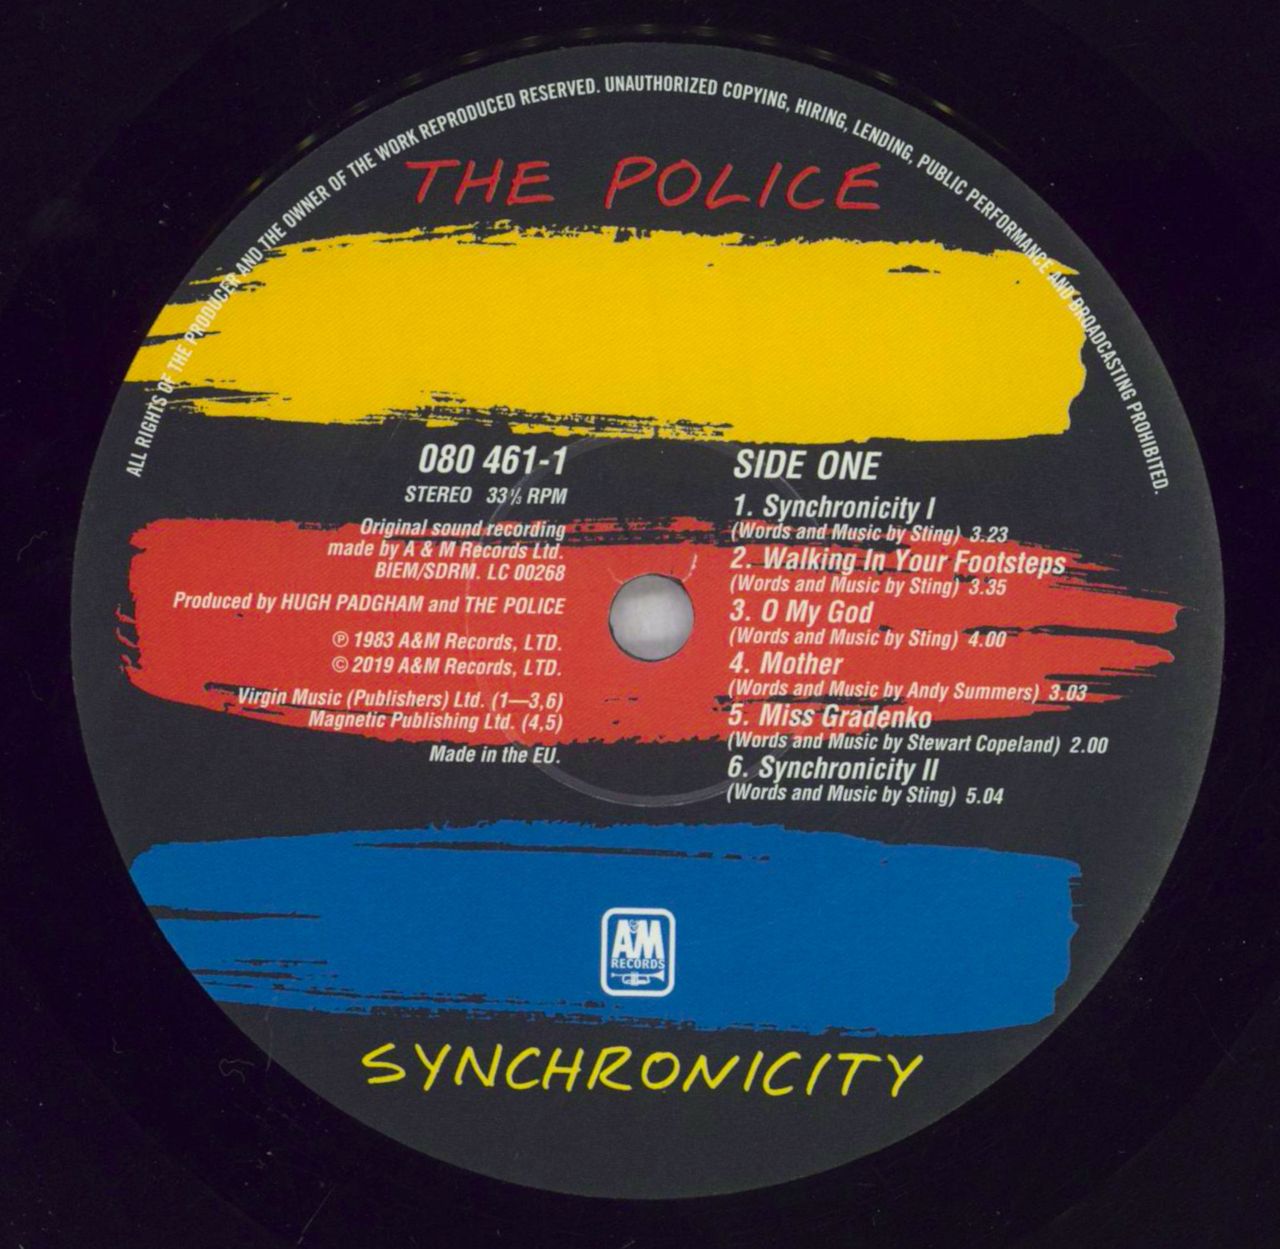 THE POLICE - Synchronicity - 1983 - Nederland - AM Records